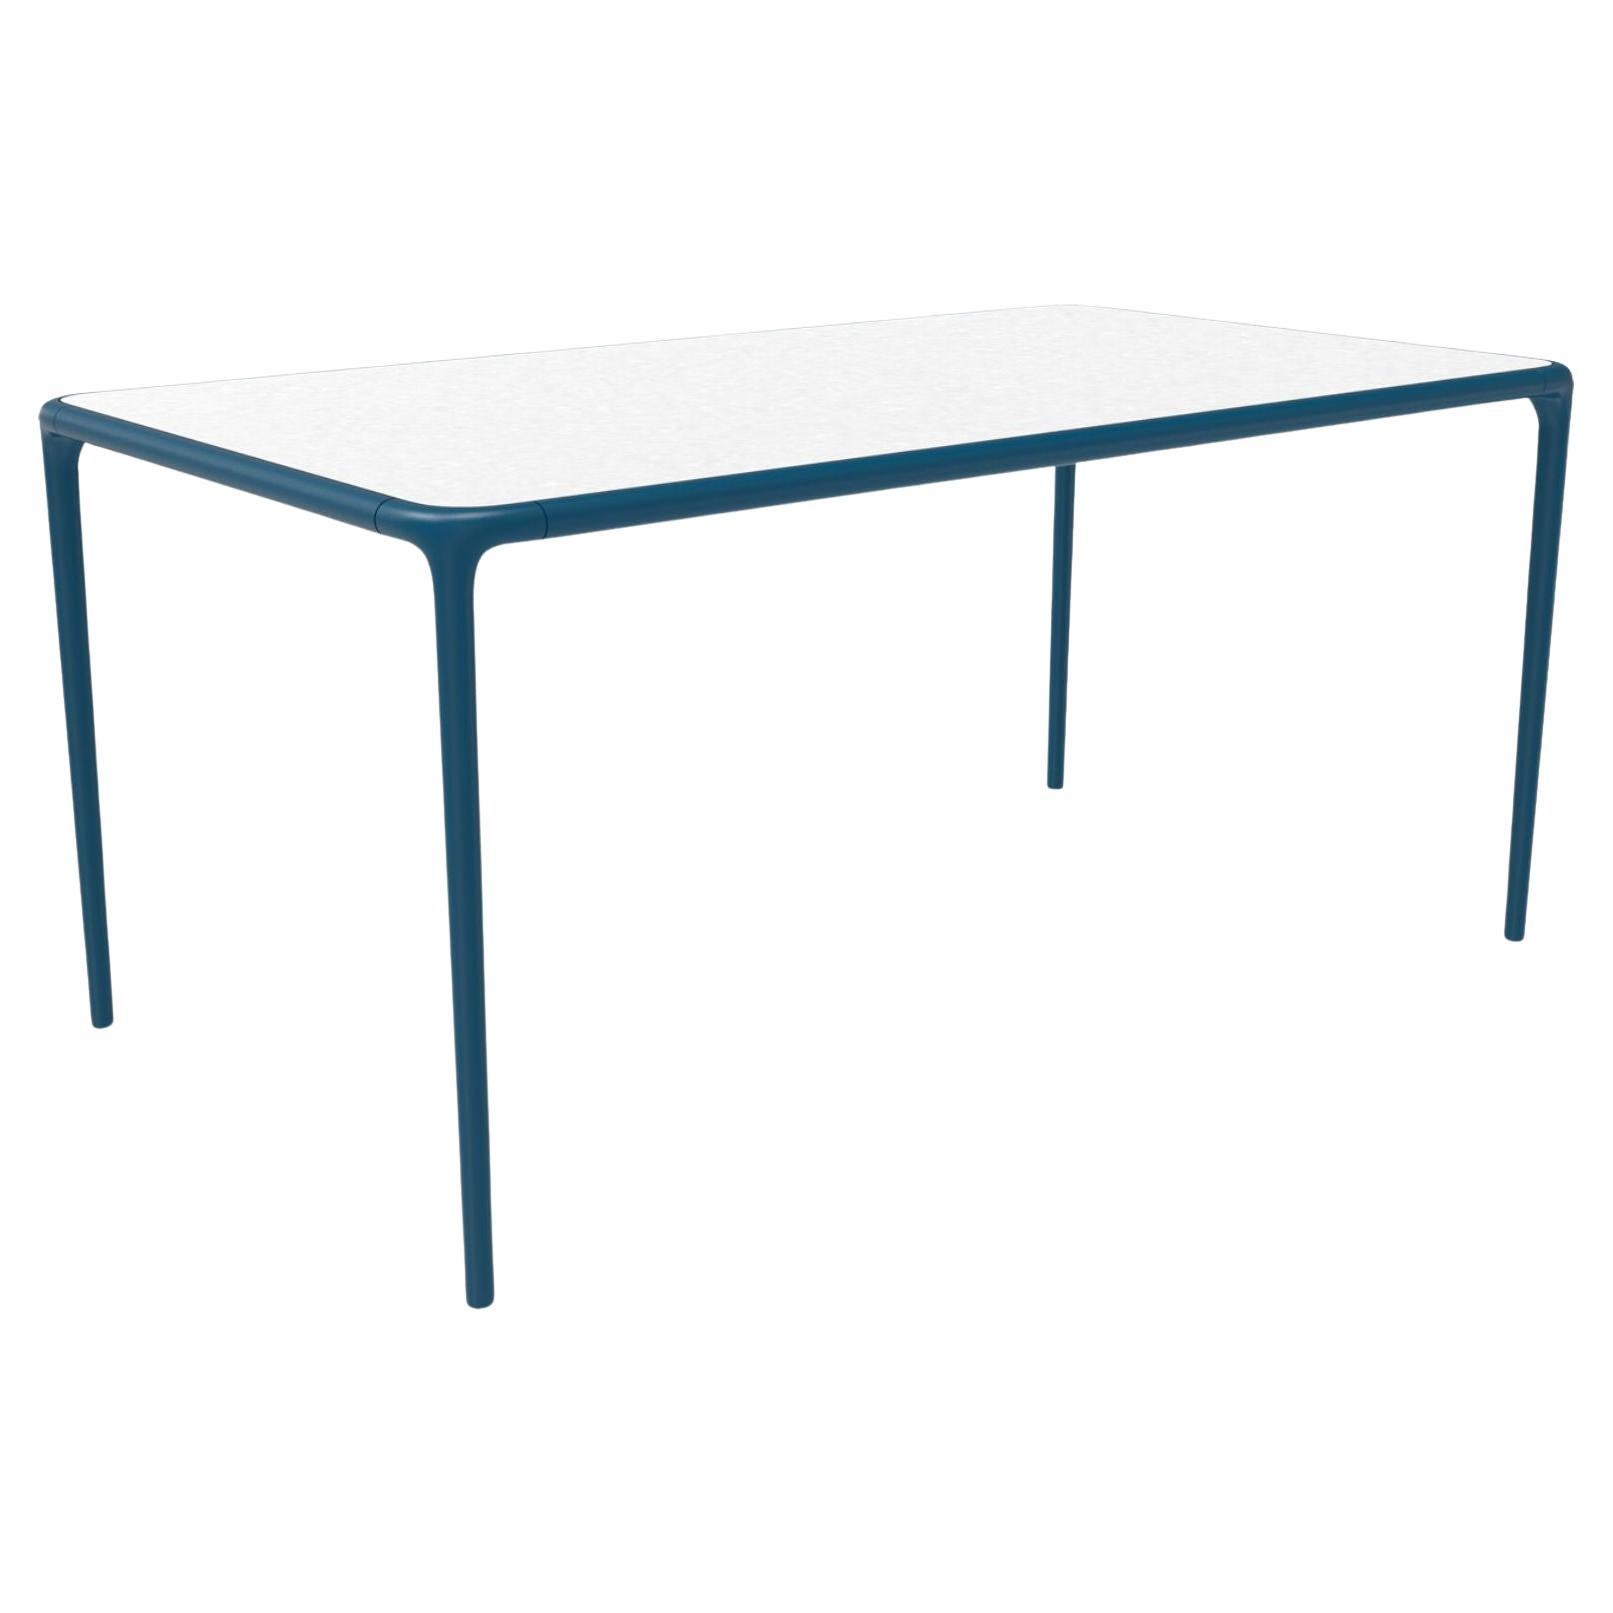 Xaloc Navy Glass Top Table 160 by Mowee